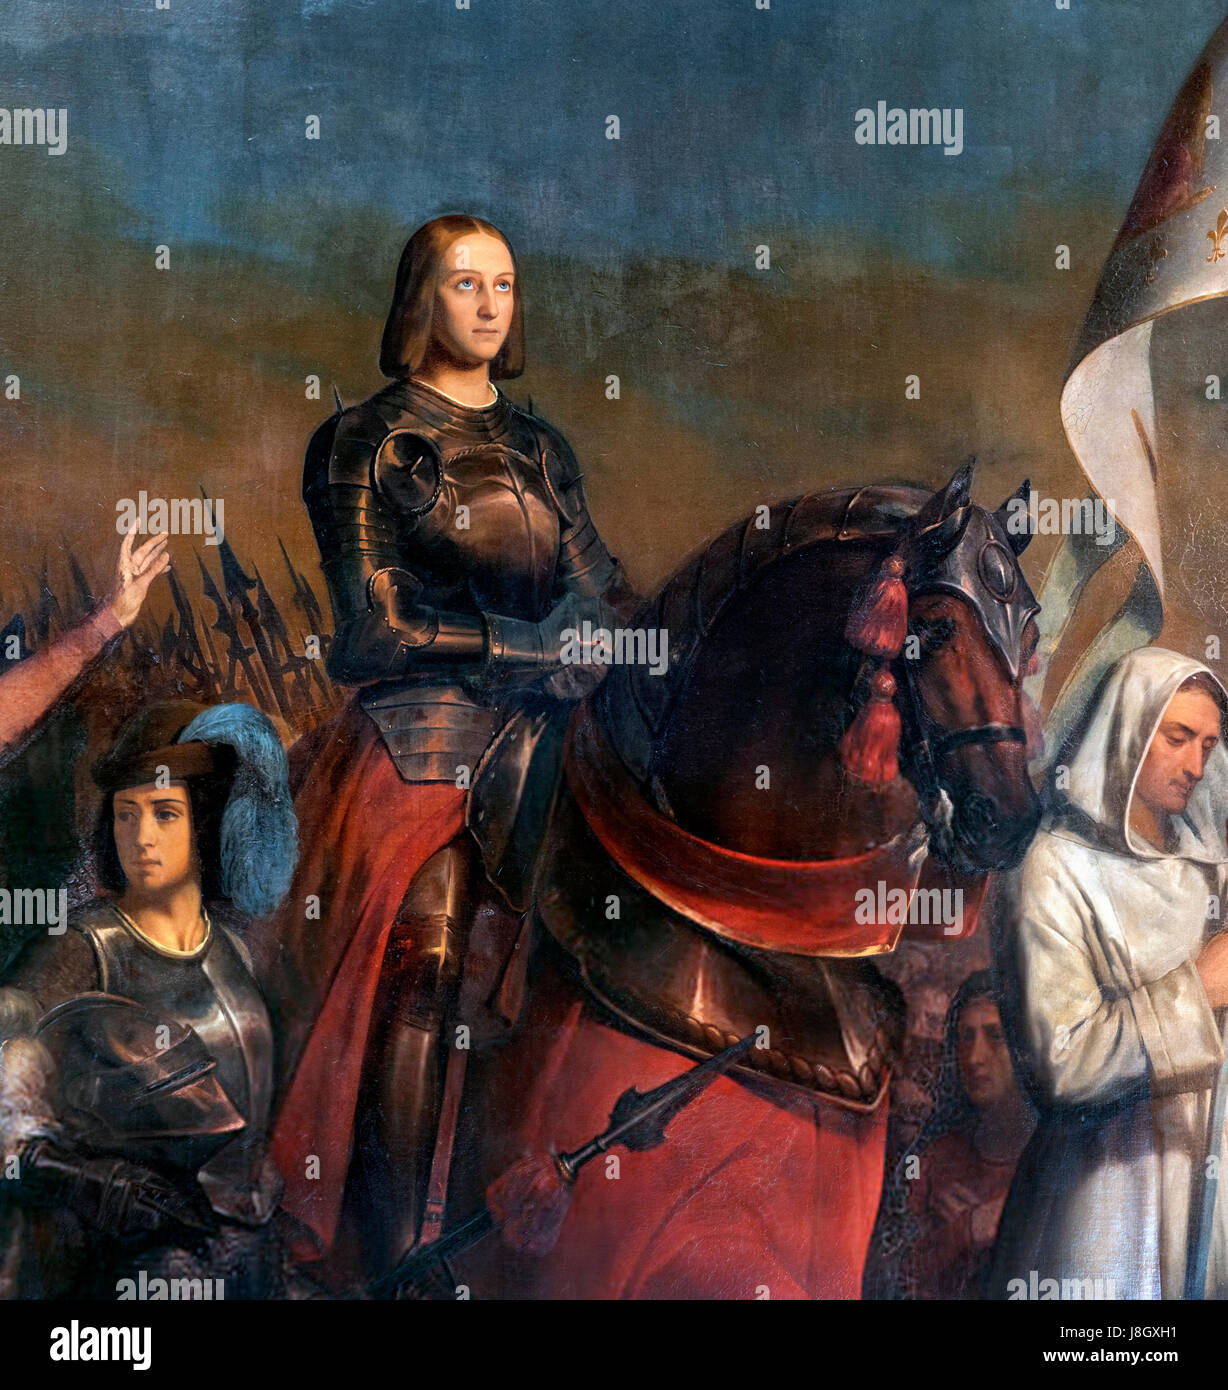 Joan Of Arc Painting High Resolution Stock Photography and Images - Alamy